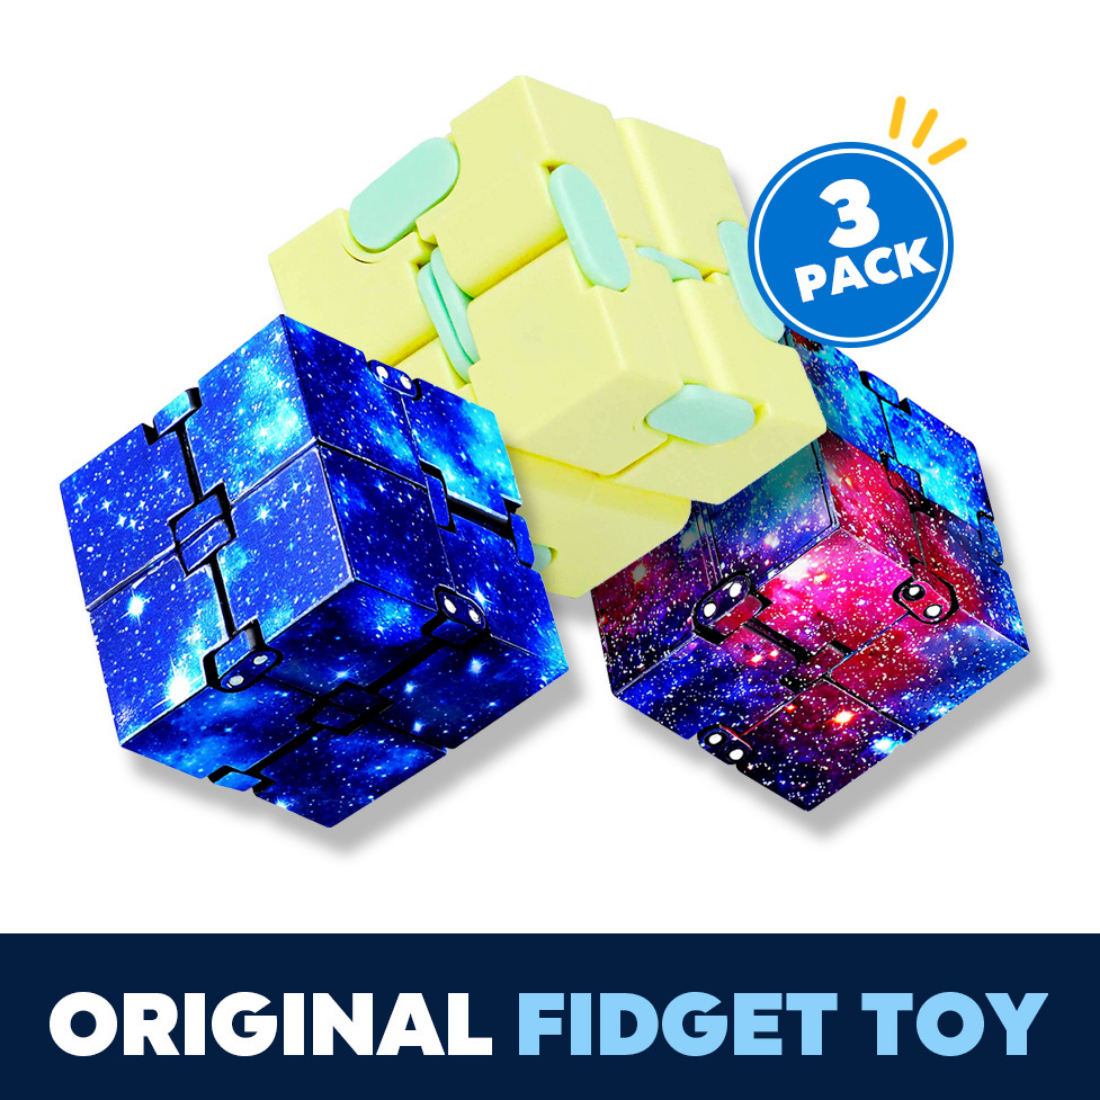 Infinity Cubes 3 Pieces Fidget Toys Set Fidget Cube for ADD ADHD Killing Time Fidget Blocks for Stress and Anxiety Relief for Adults and Kids Hand-Held Magic Puzzle 